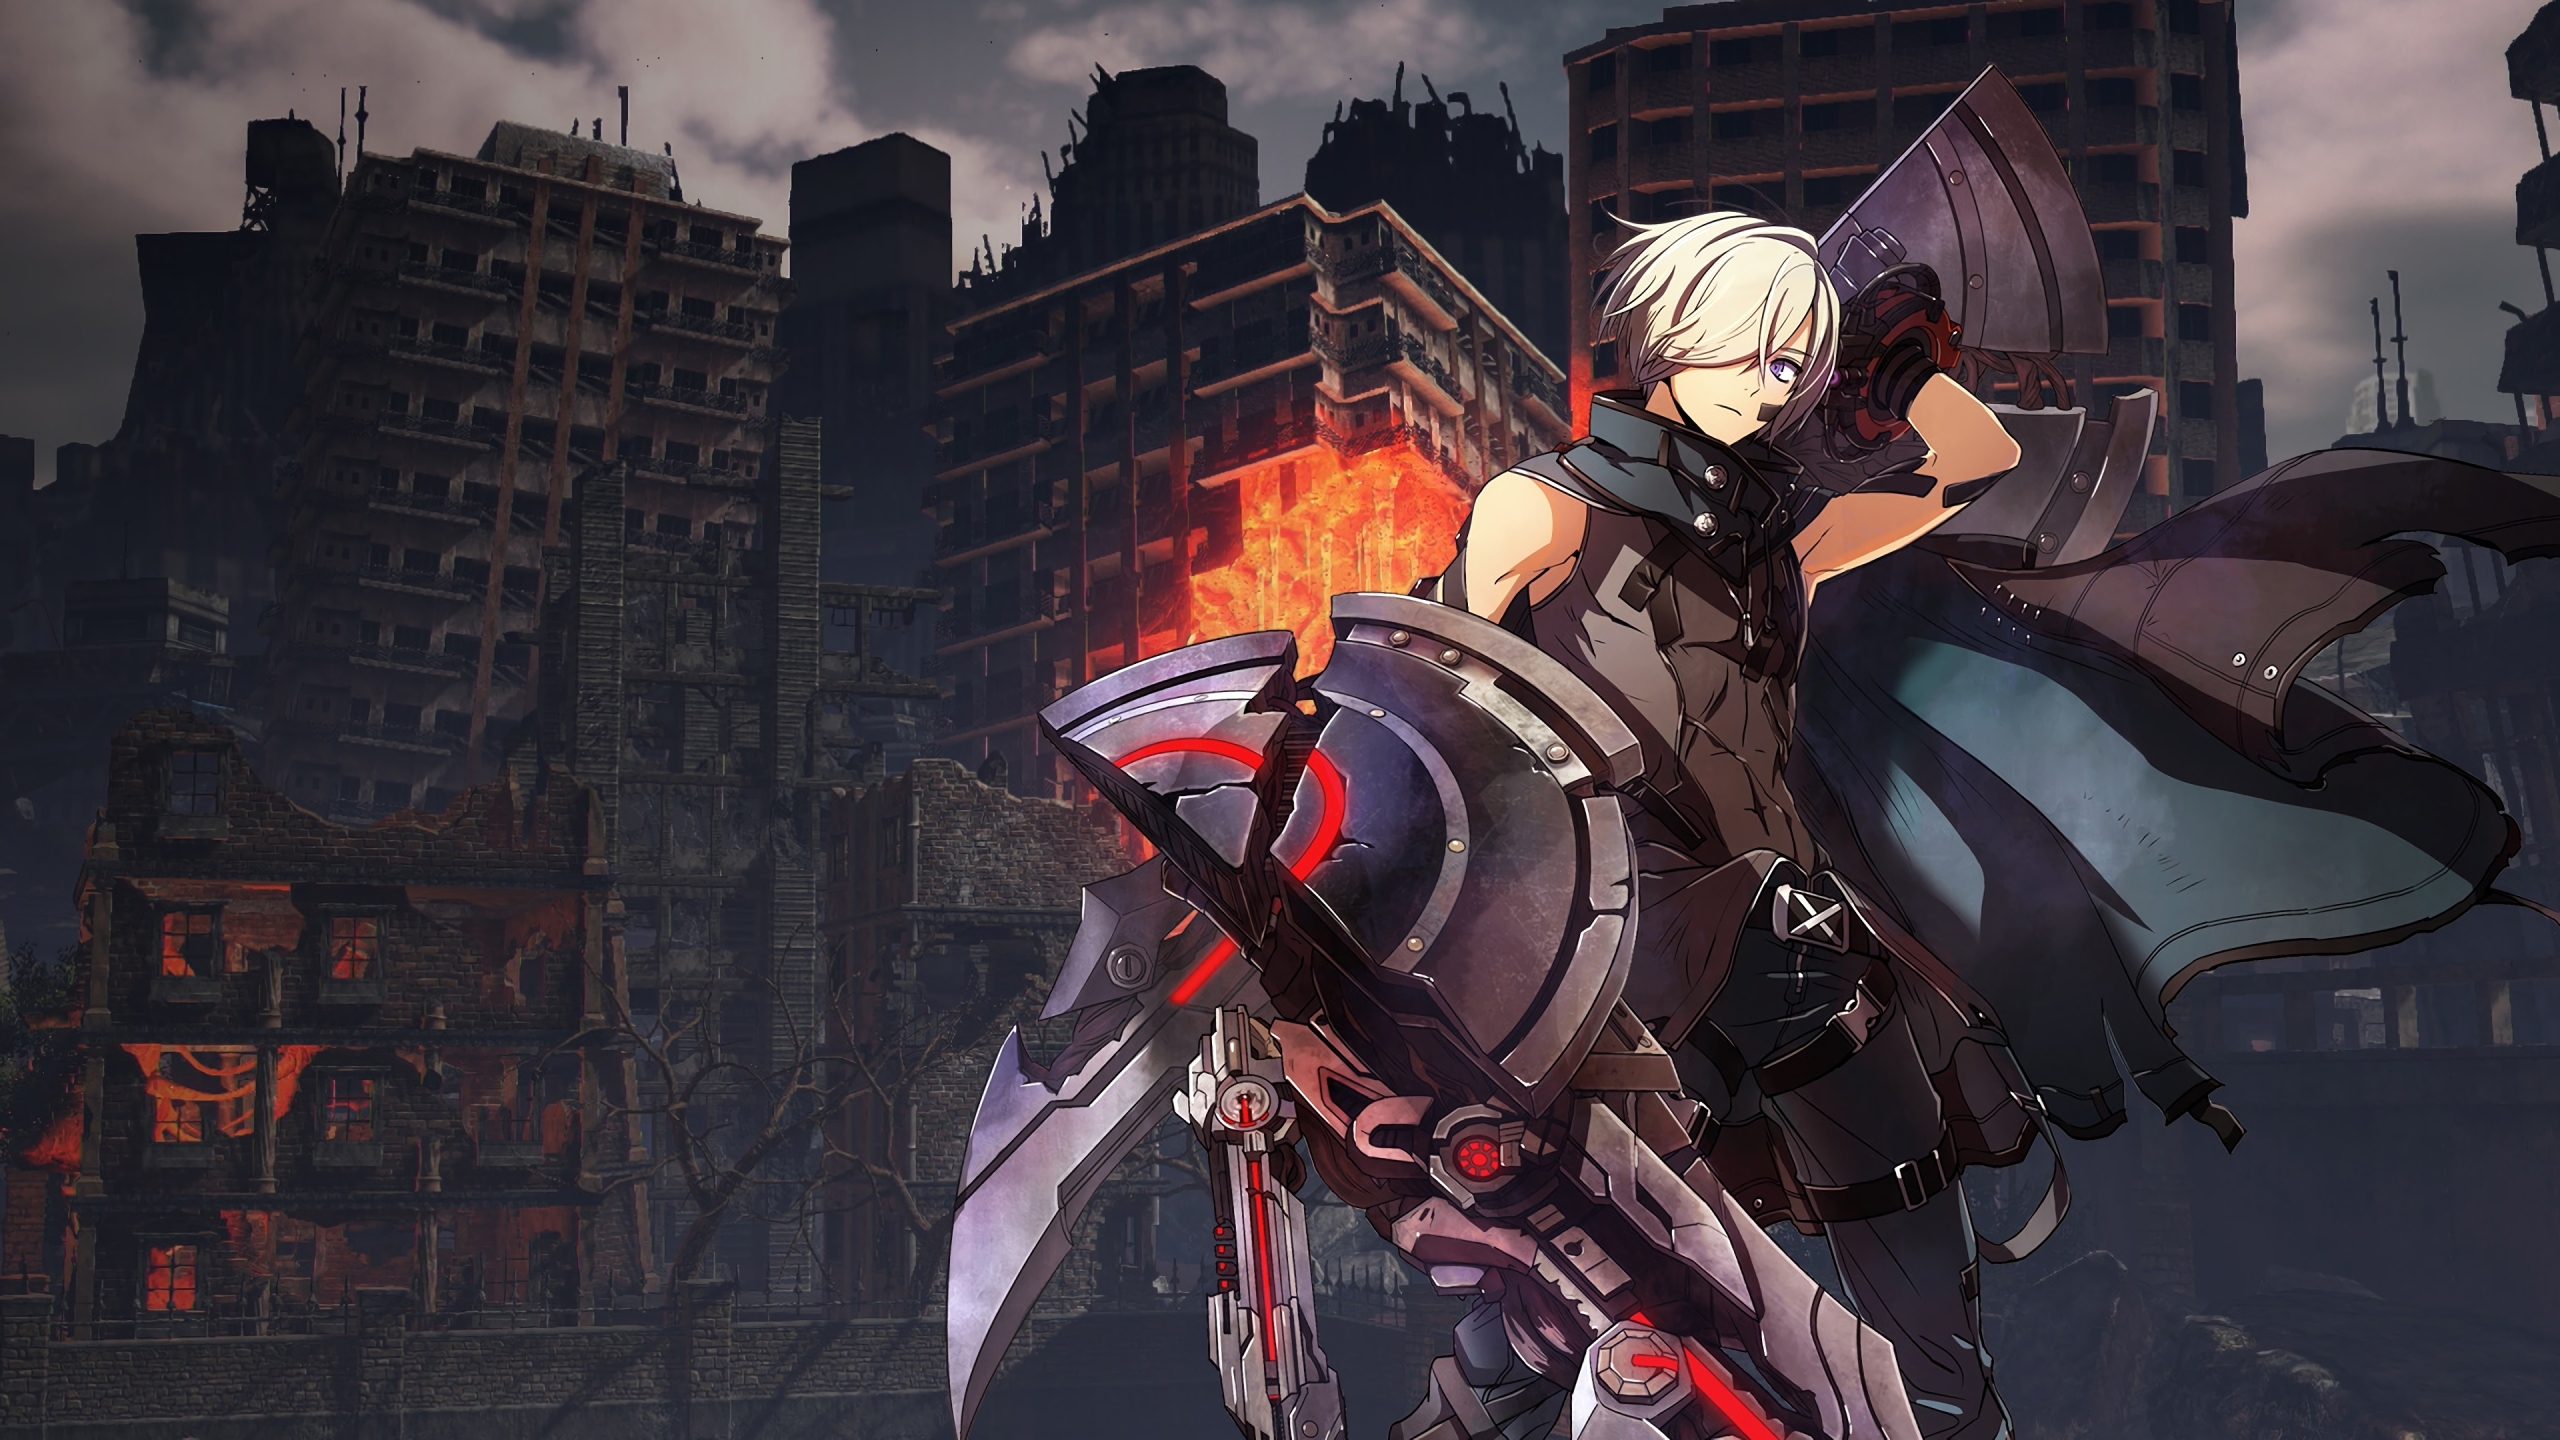 2560x1440 God Eater 3 4k 1440p Resolution Wallpaper Hd Games 4k Wallpapers Images Photos And Background